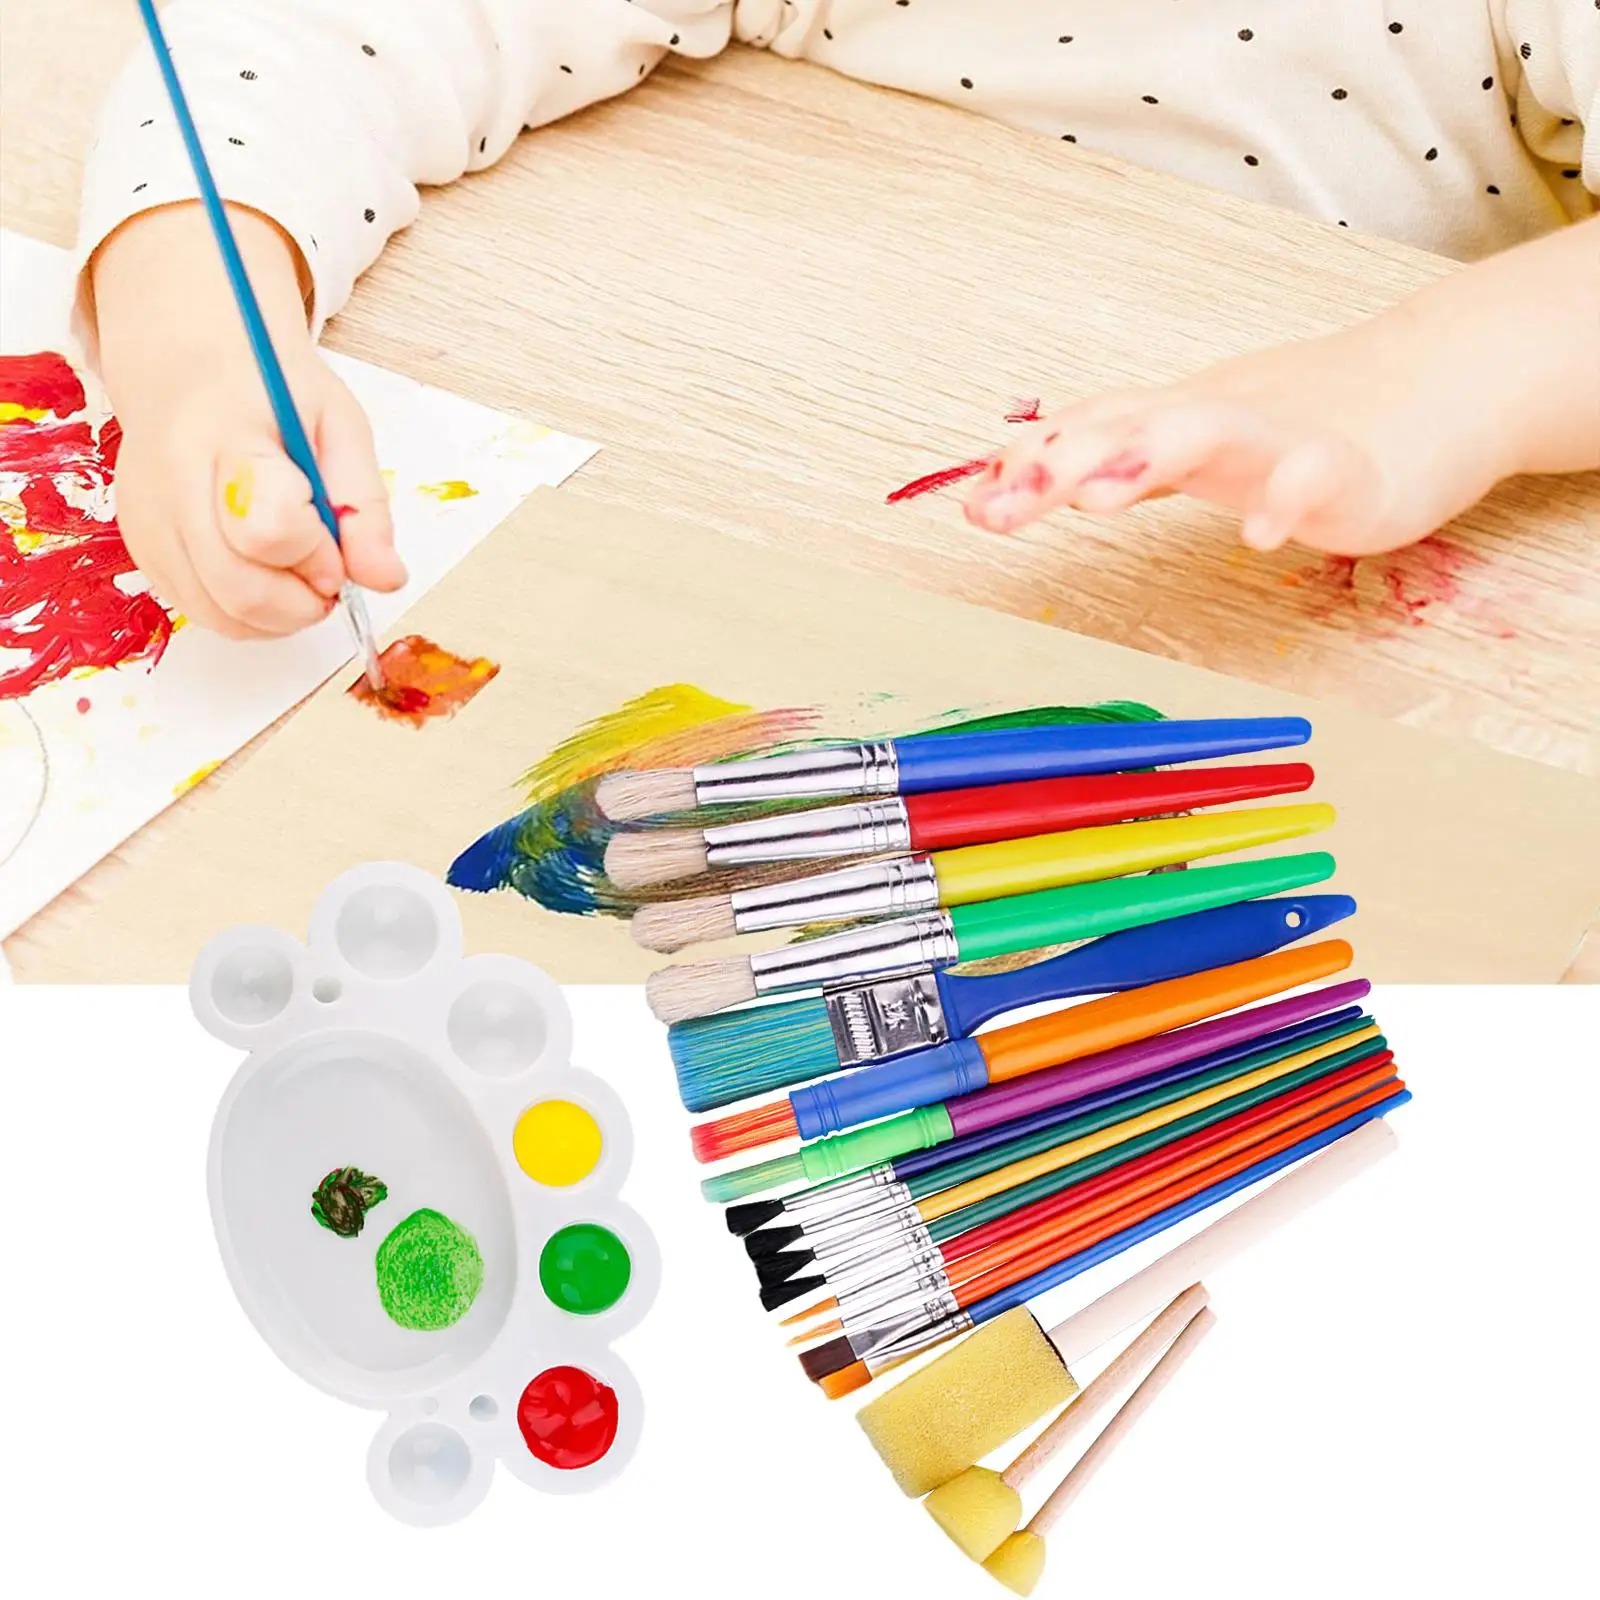 19x Paint Brush Set Watercolor Professional Durable Kids Adults Drawing Accessories Girls and Boys Beginner Paintbrush